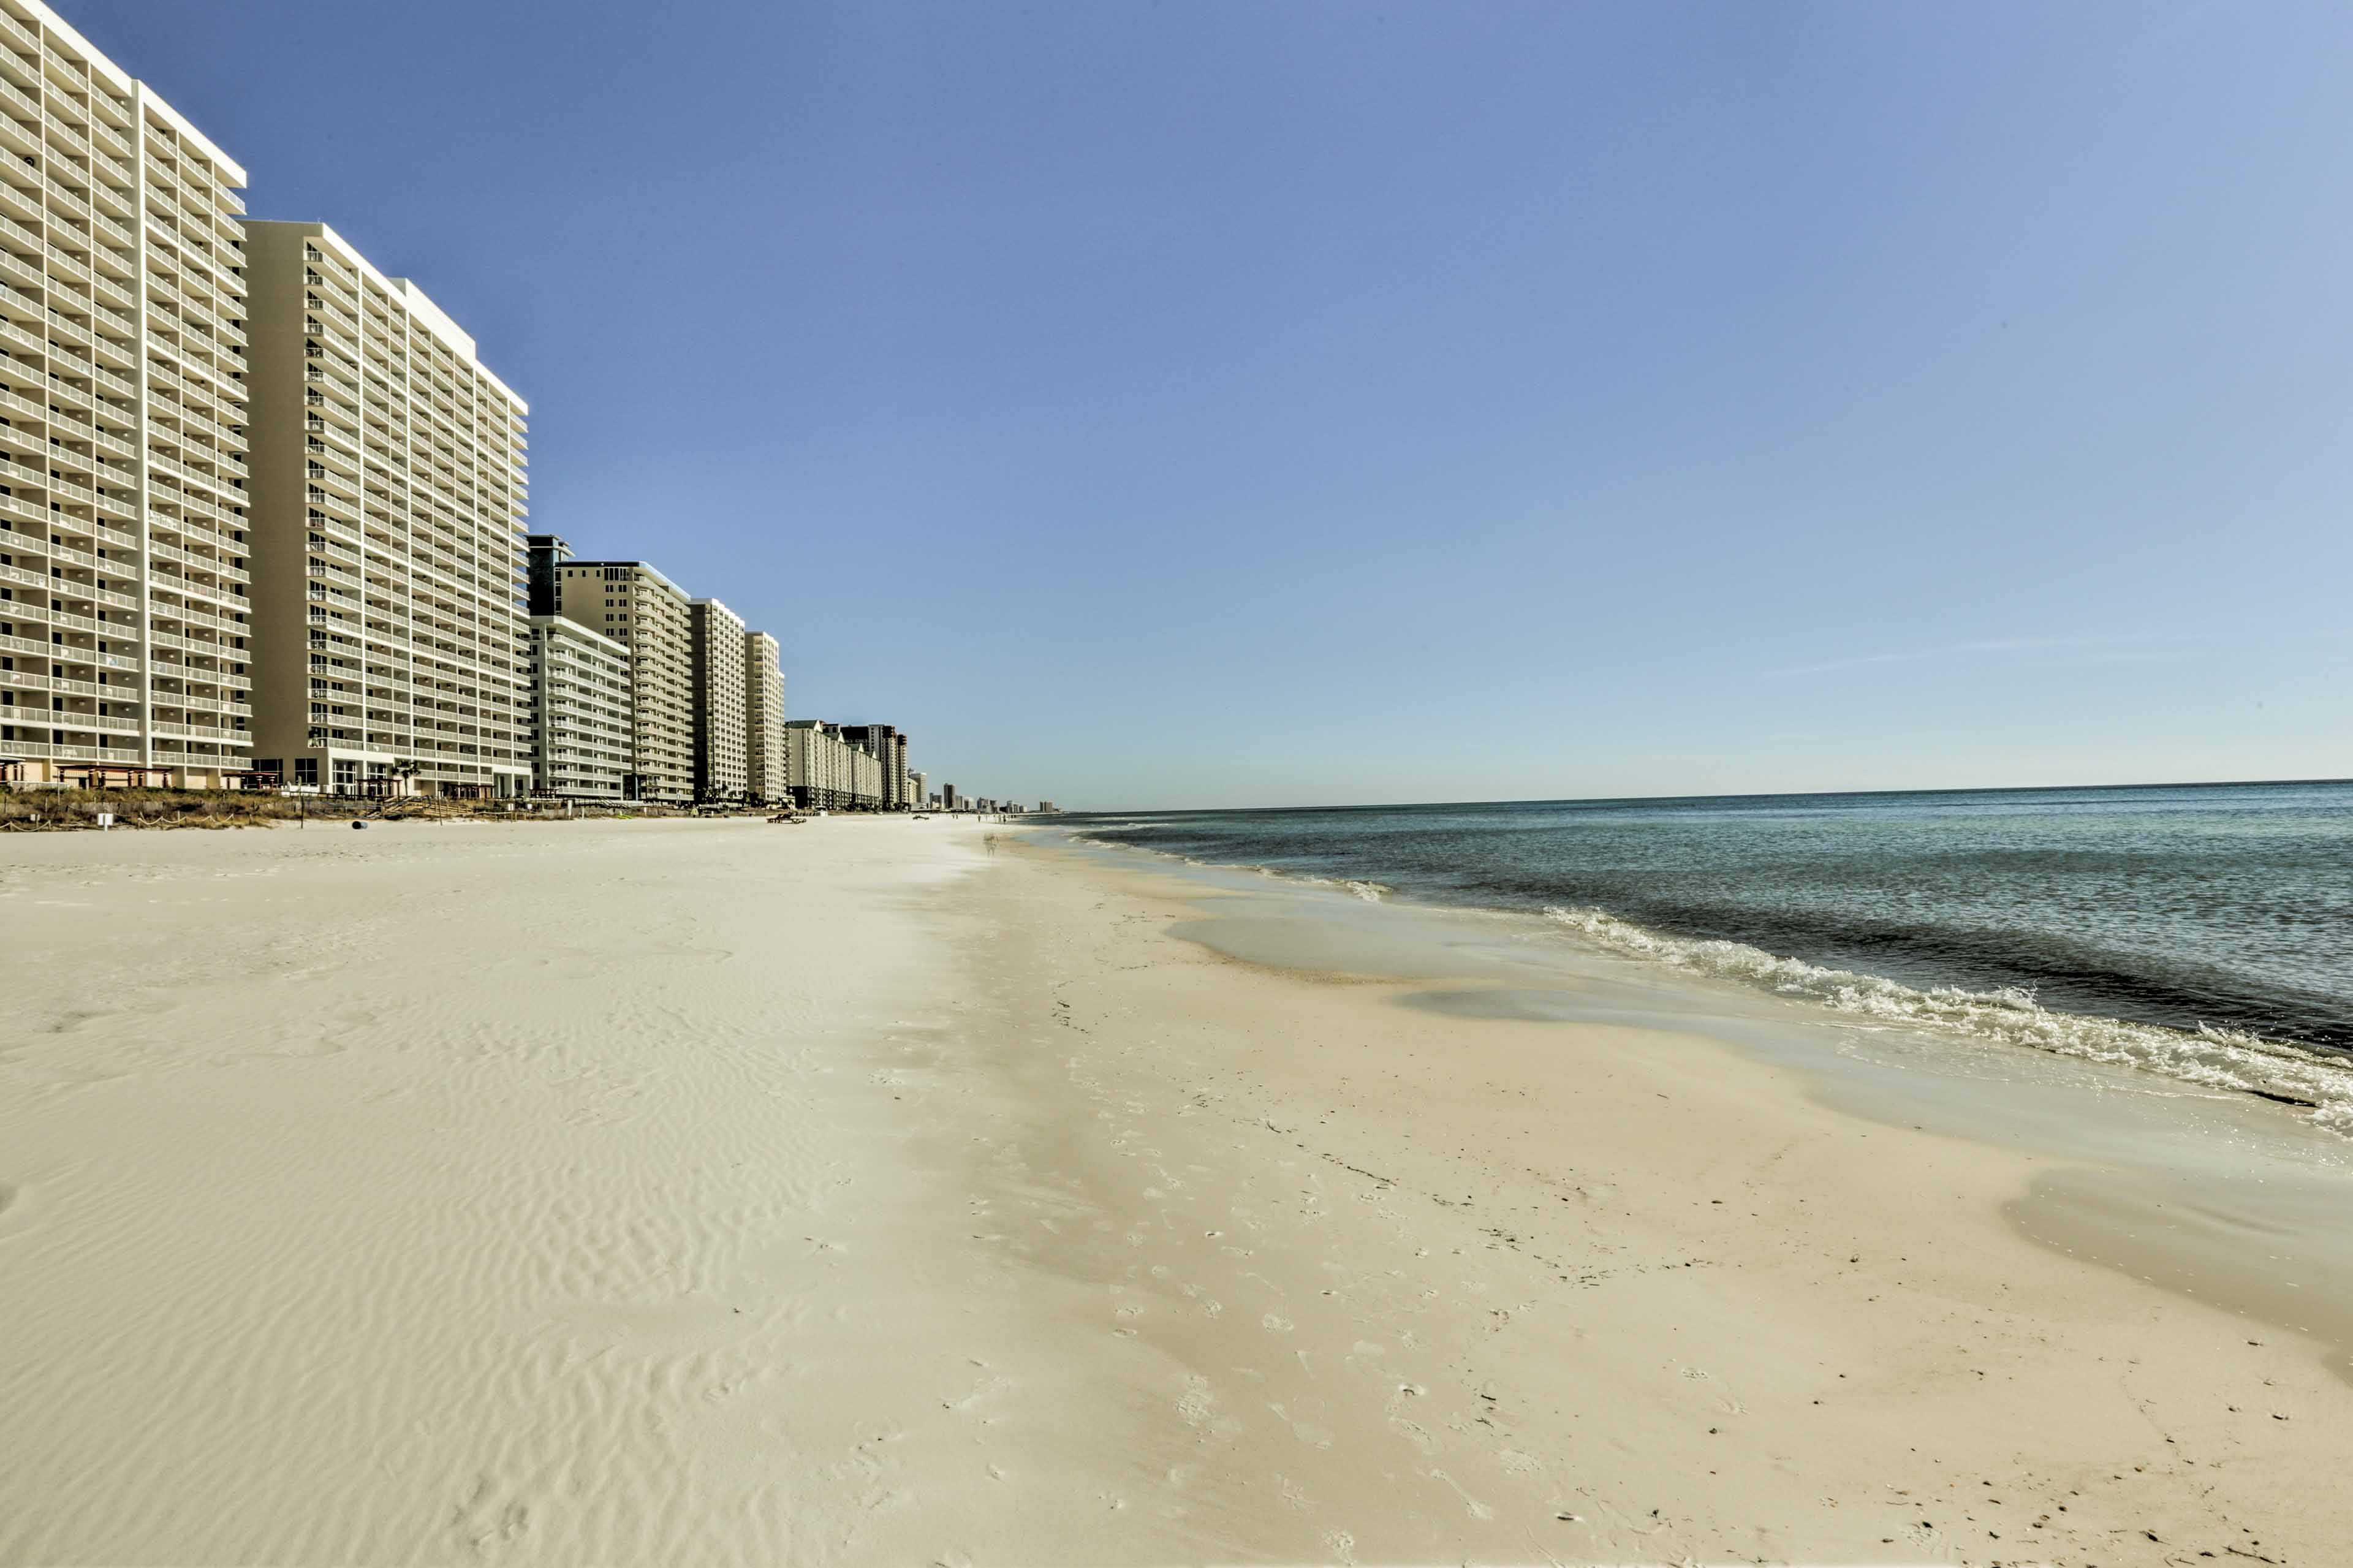 Soak up the sun on the beach and experience the bustling nightlife.